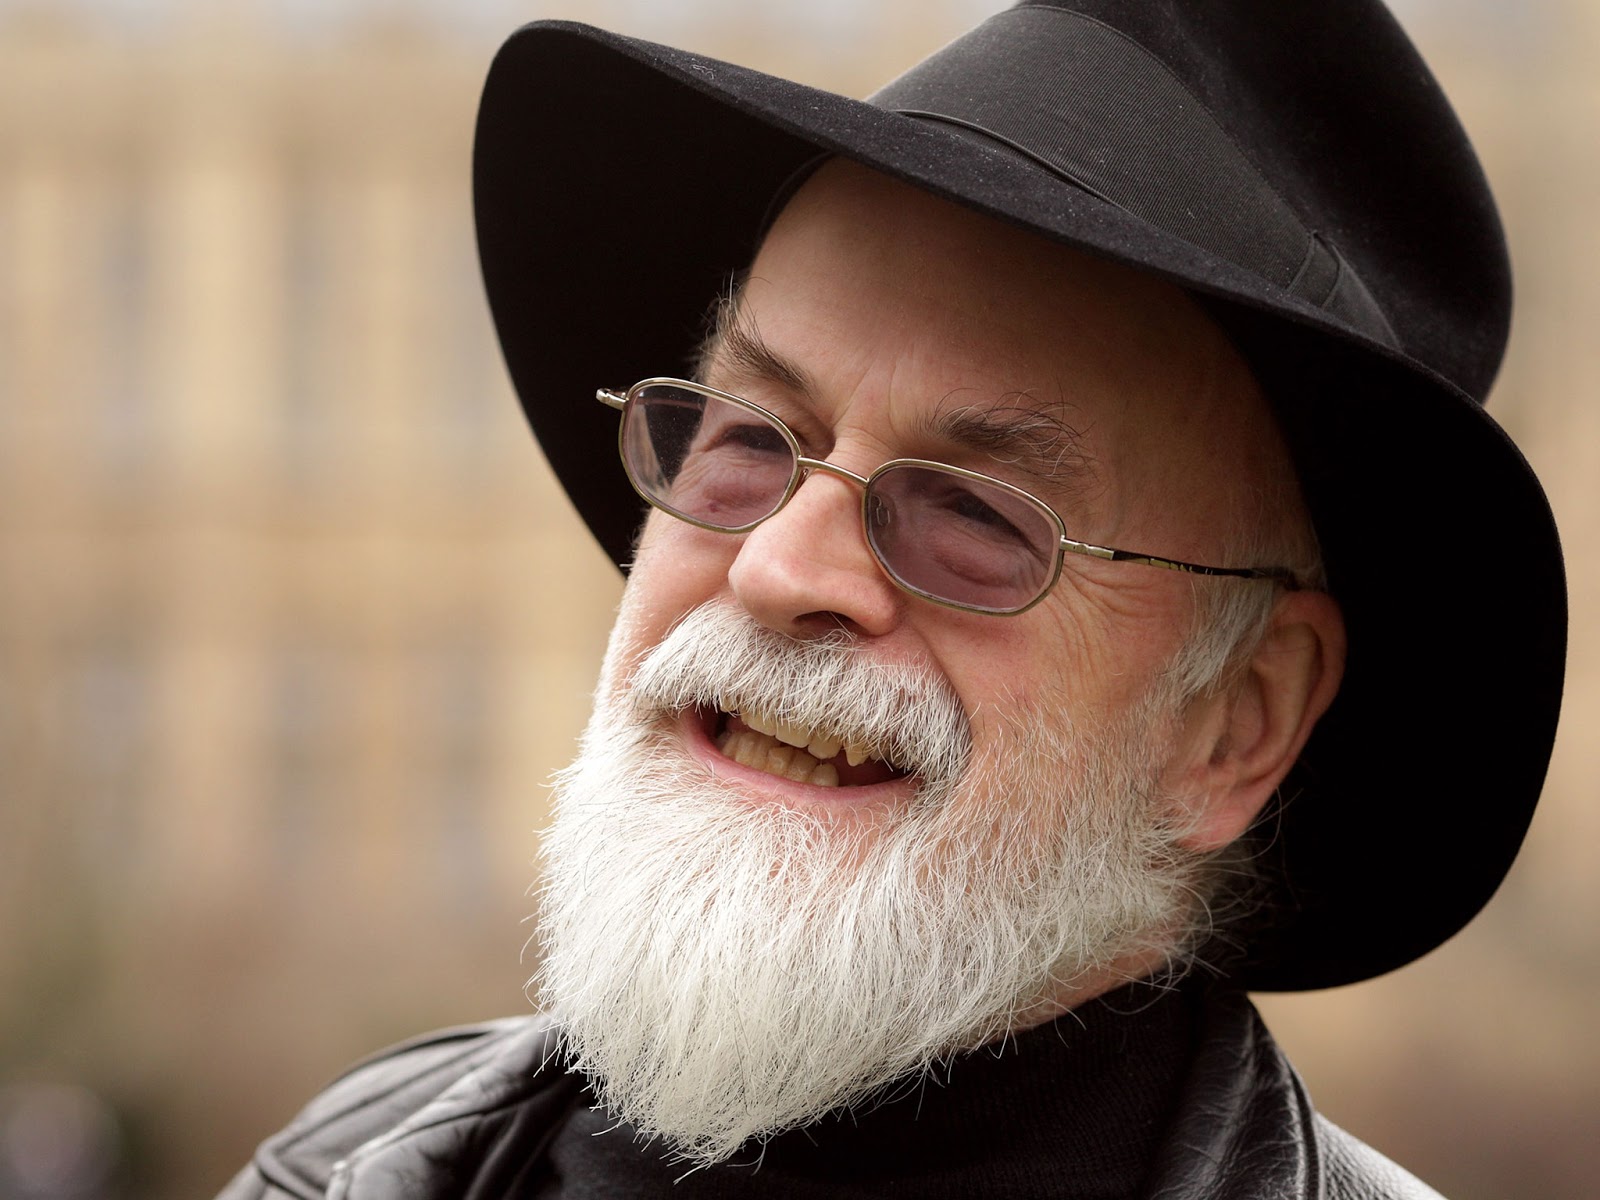 Terry Pratchett in his signature black hat, tinted glasses, and white Father Christmas beard